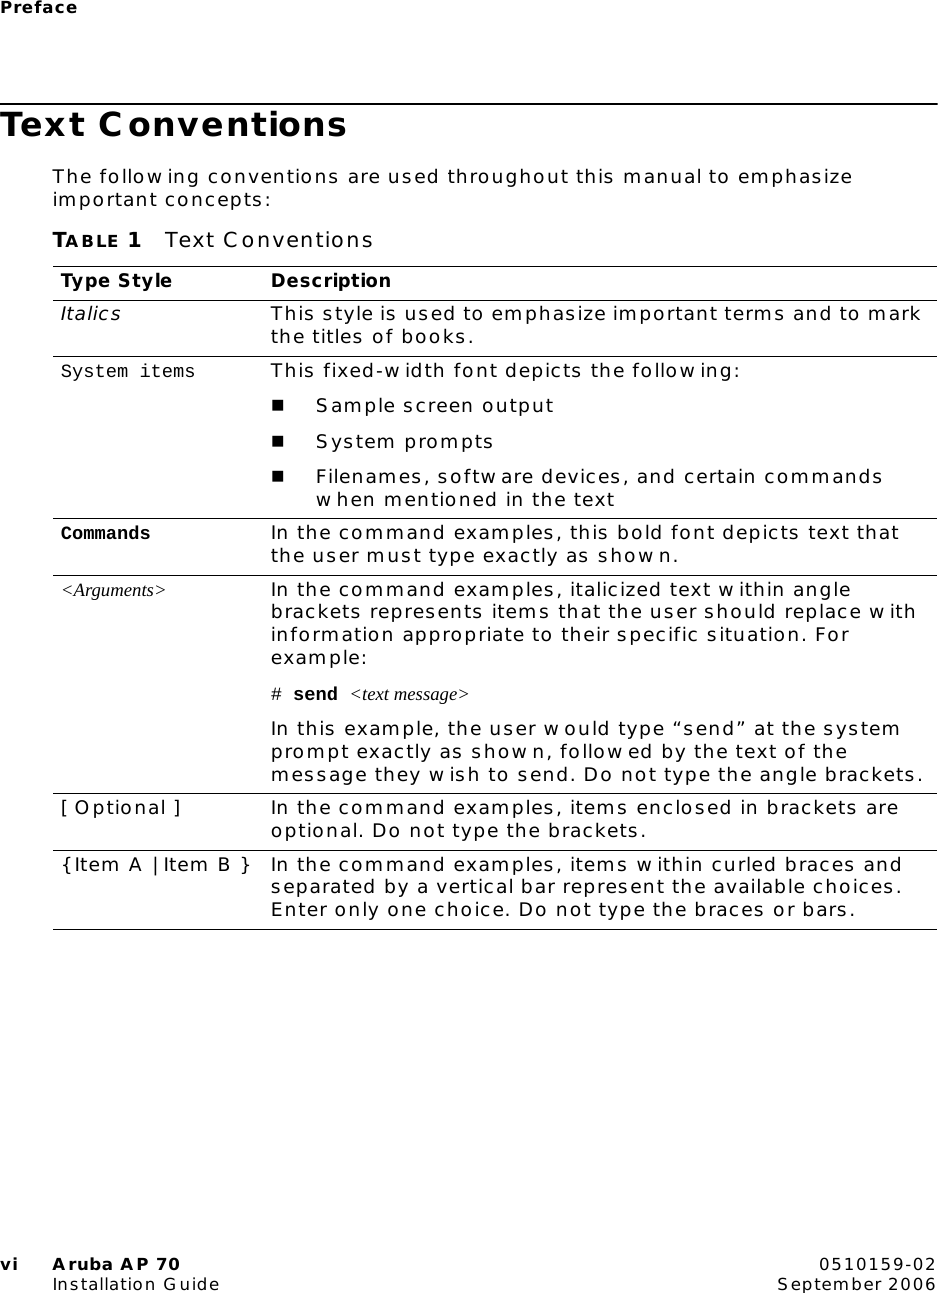 Prefacevi Aruba AP 70 0510159-02Installation Guide September 2006Text ConventionsThe following conventions are used throughout this manual to emphasize important concepts:TABLE 1 Text ConventionsType Style DescriptionItalics This style is used to emphasize important terms and to mark the titles of books.System items This fixed-width font depicts the following:Sample screen outputSystem promptsFilenames, software devices, and certain commands when mentioned in the textCommands In the command examples, this bold font depicts text that the user must type exactly as shown.&lt;Arguments&gt; In the command examples, italicized text within angle brackets represents items that the user should replace with information appropriate to their specific situation. For example:# send &lt;text message&gt;In this example, the user would type “send” at the system prompt exactly as shown, followed by the text of the message they wish to send. Do not type the angle brackets.[ Optional ] In the command examples, items enclosed in brackets are optional. Do not type the brackets.{ Item A | Item B } In the command examples, items within curled braces and separated by a vertical bar represent the available choices. Enter only one choice. Do not type the braces or bars.